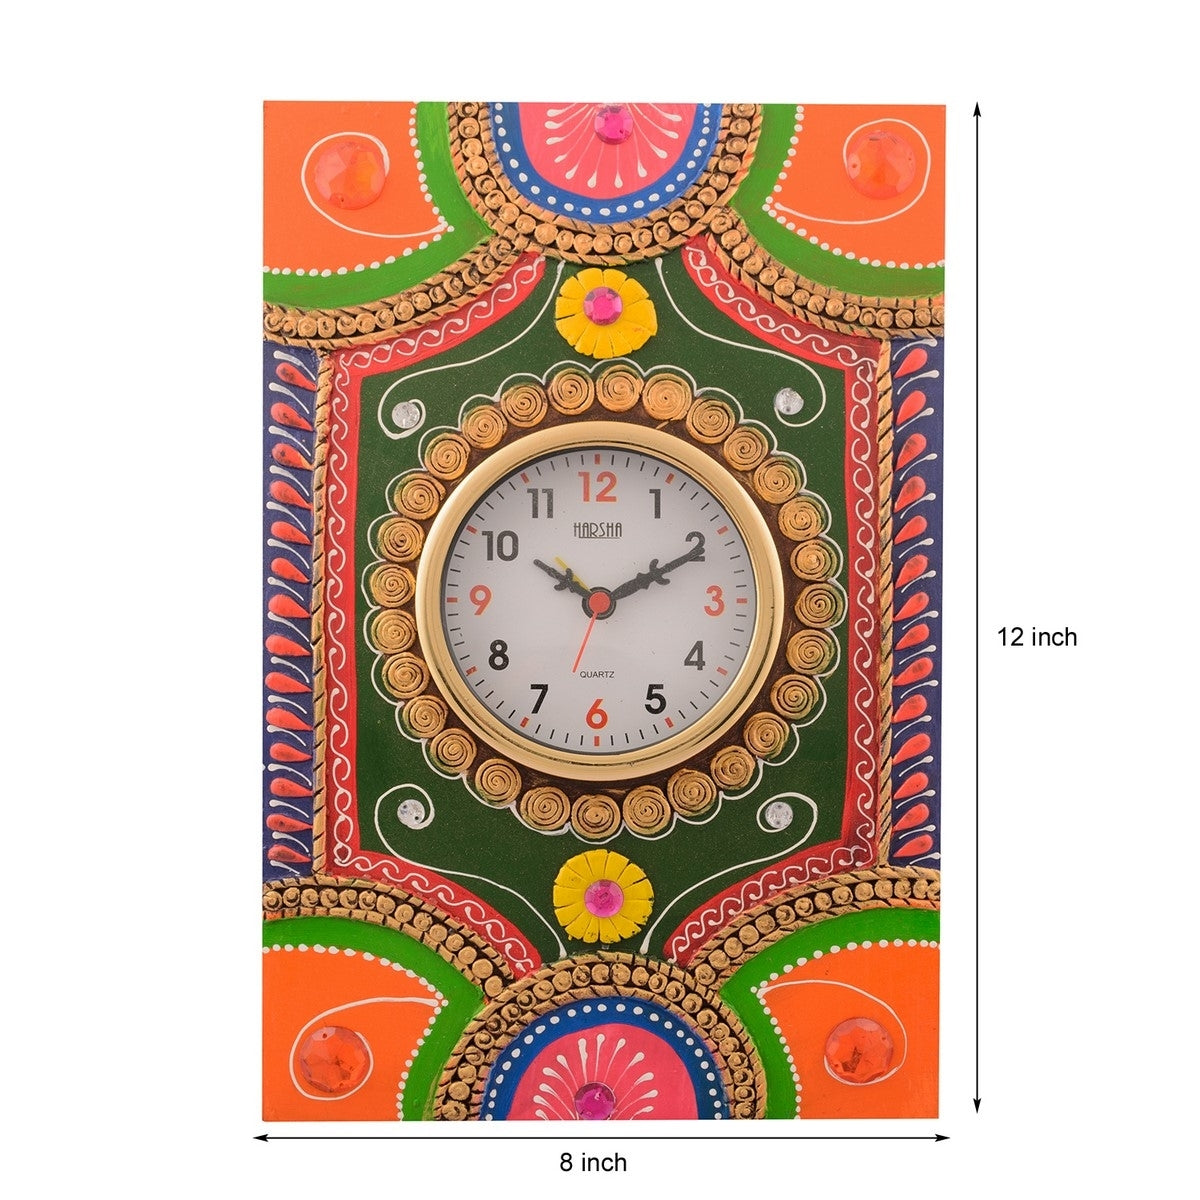 Wooden Papier Mache Traditional Work Artistic Handcrafted Wall Clock 2